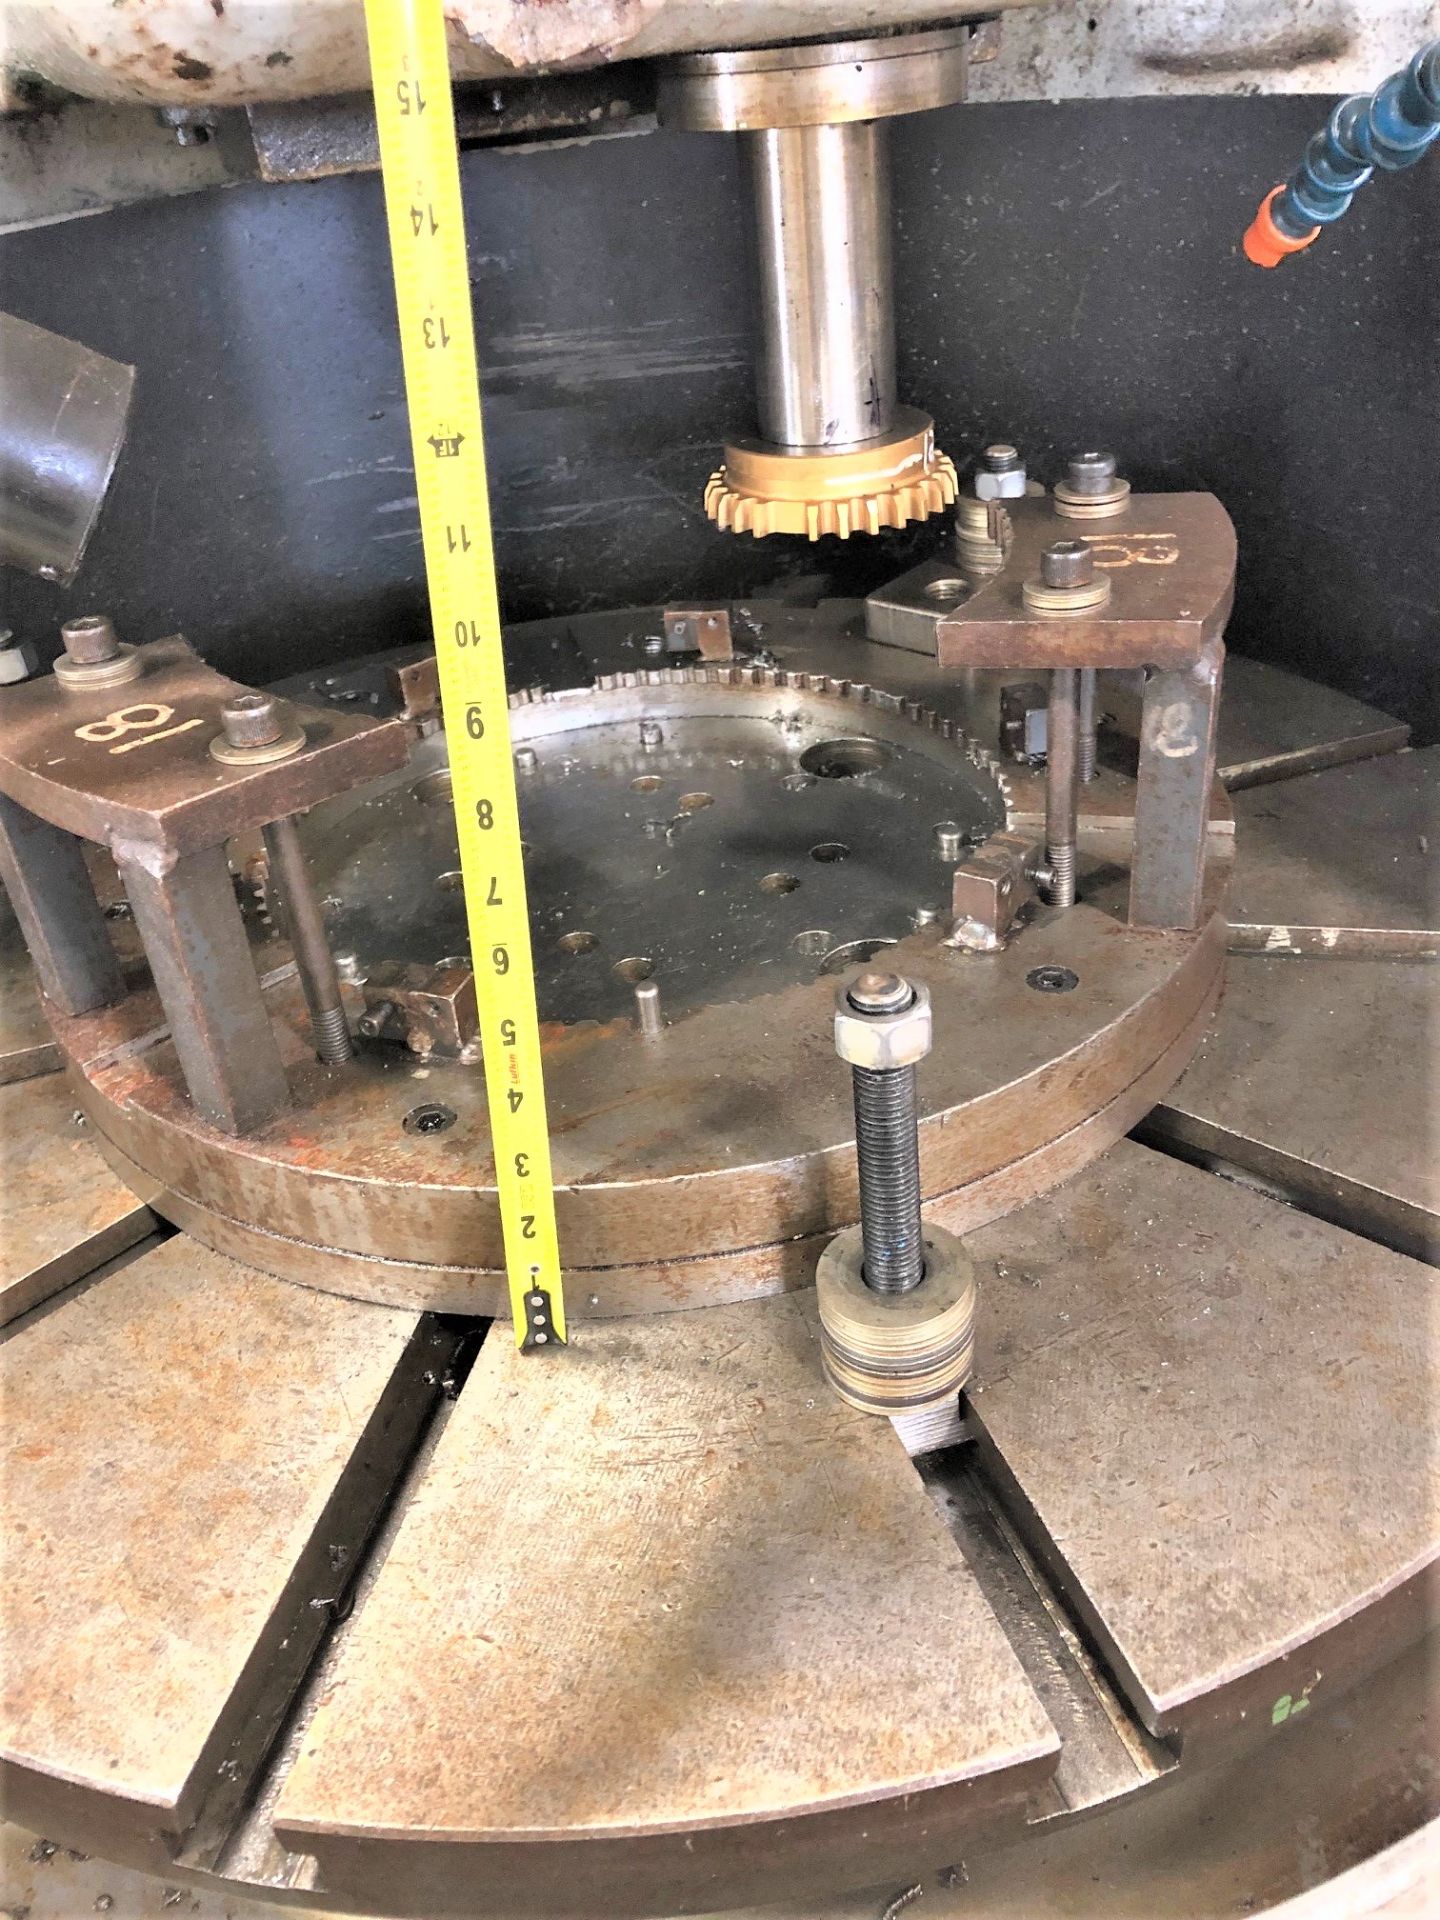 36" Fellows Model 36-6 Vertical Gear Shaper, S/N 33619 Specifications, One (1) - Model No. 36-6 - Image 4 of 7